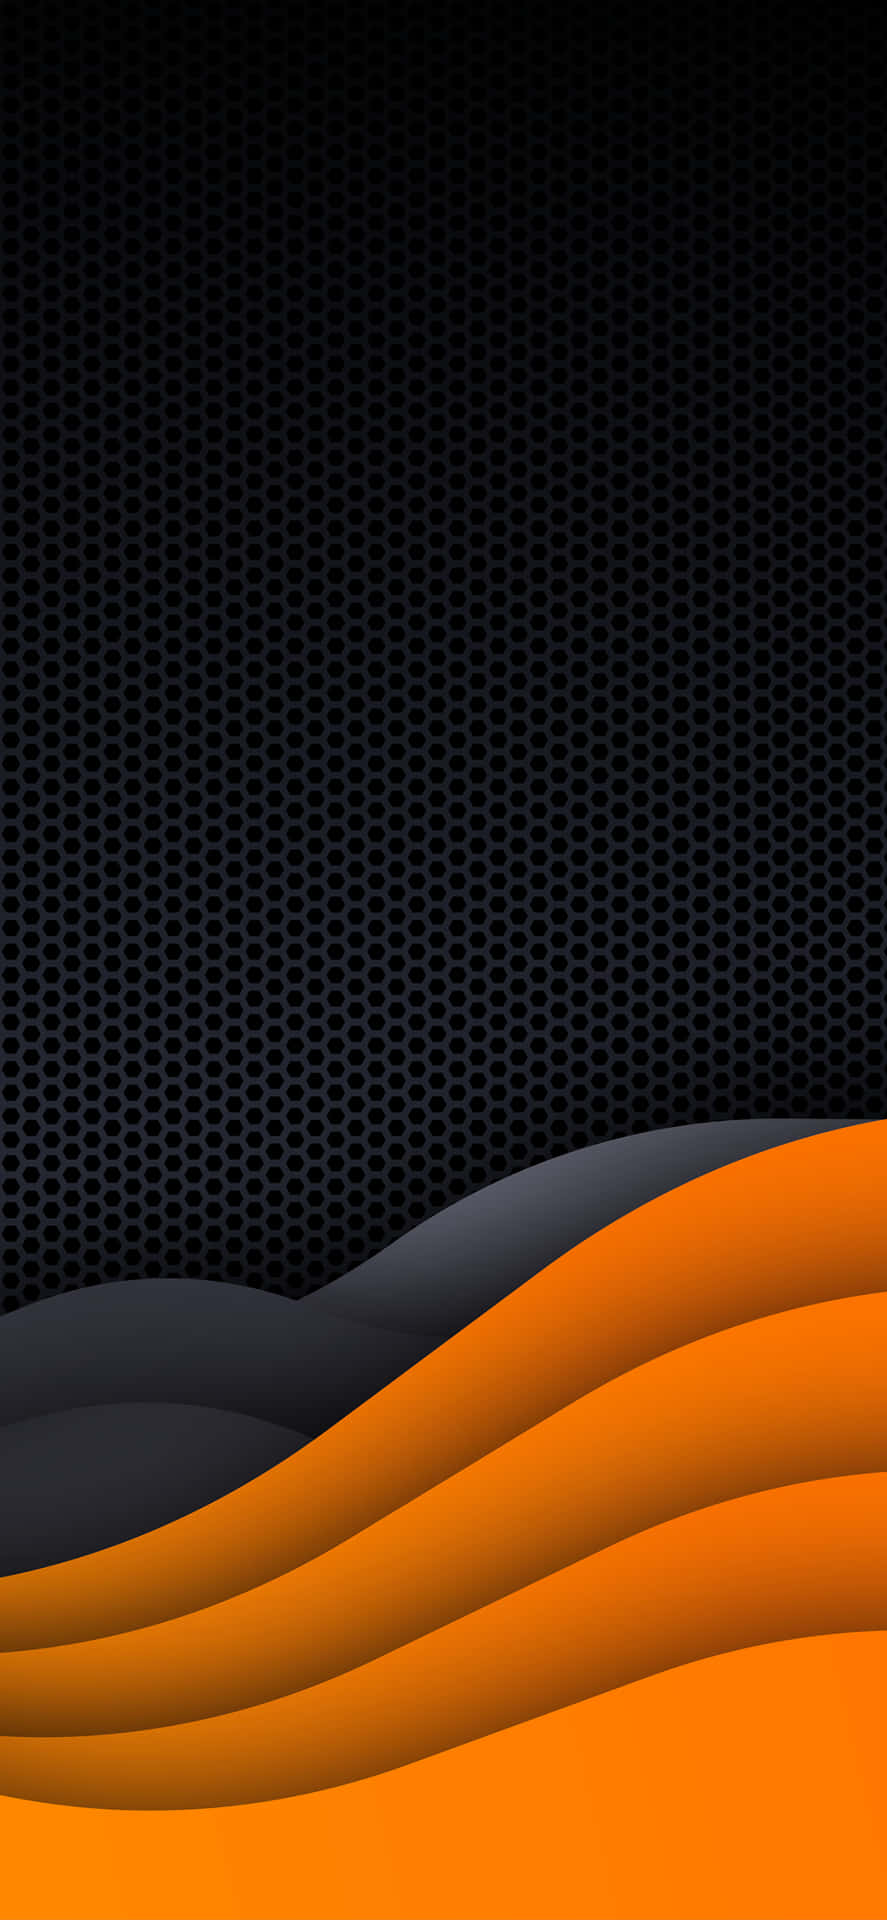 A vibrant black and orange abstract background